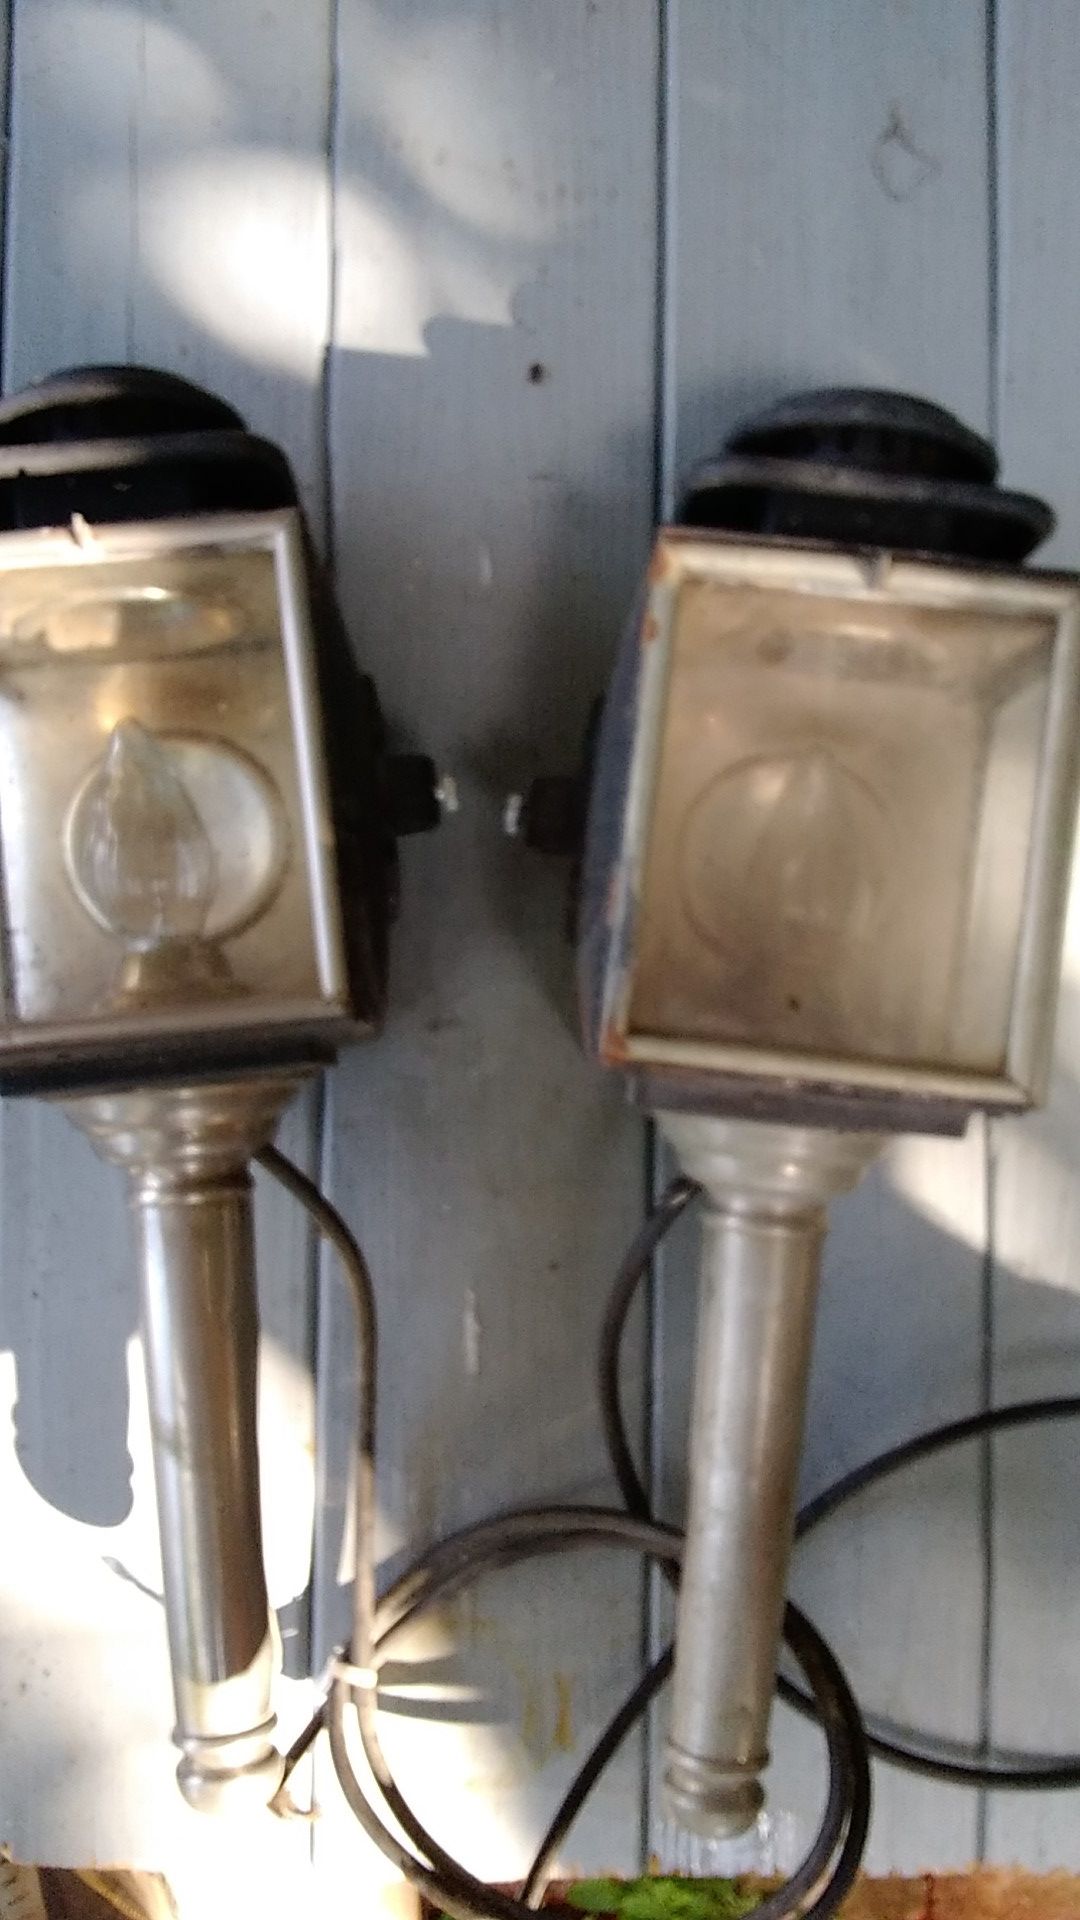 ANTIQUE AUTOMOBILE HEADLAMPS TURNED INTO PORCH LAMPS